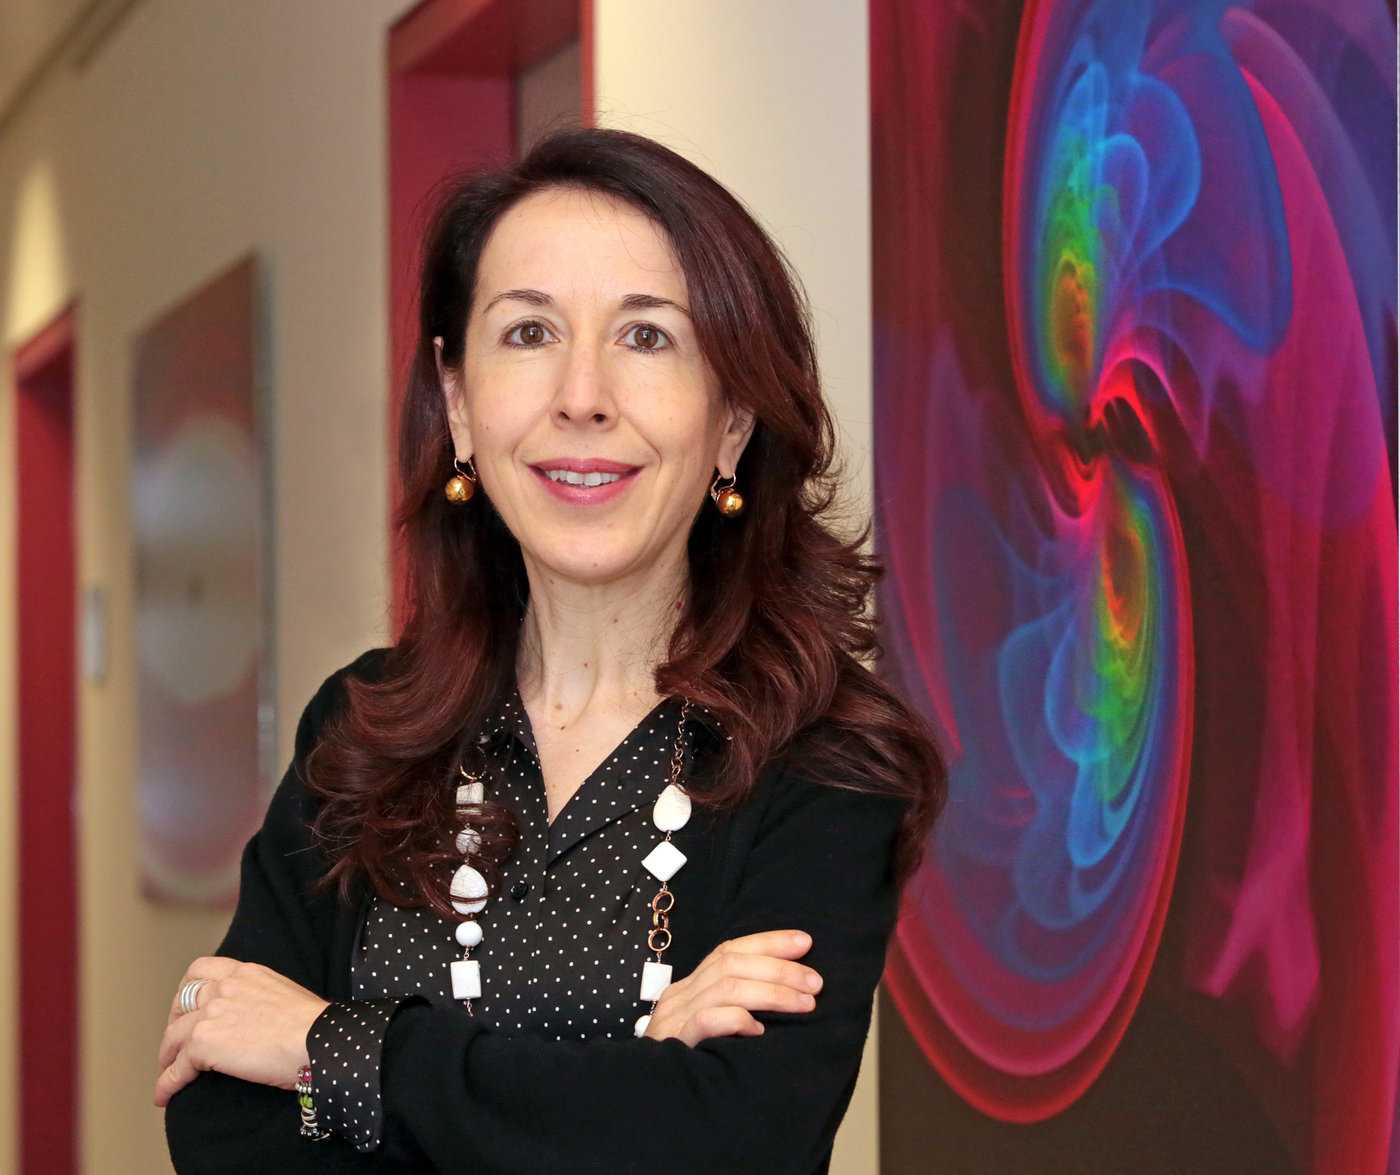 News-Image 8 of: Alessandra Buonanno elected member of the Italian National Academy of Sciences